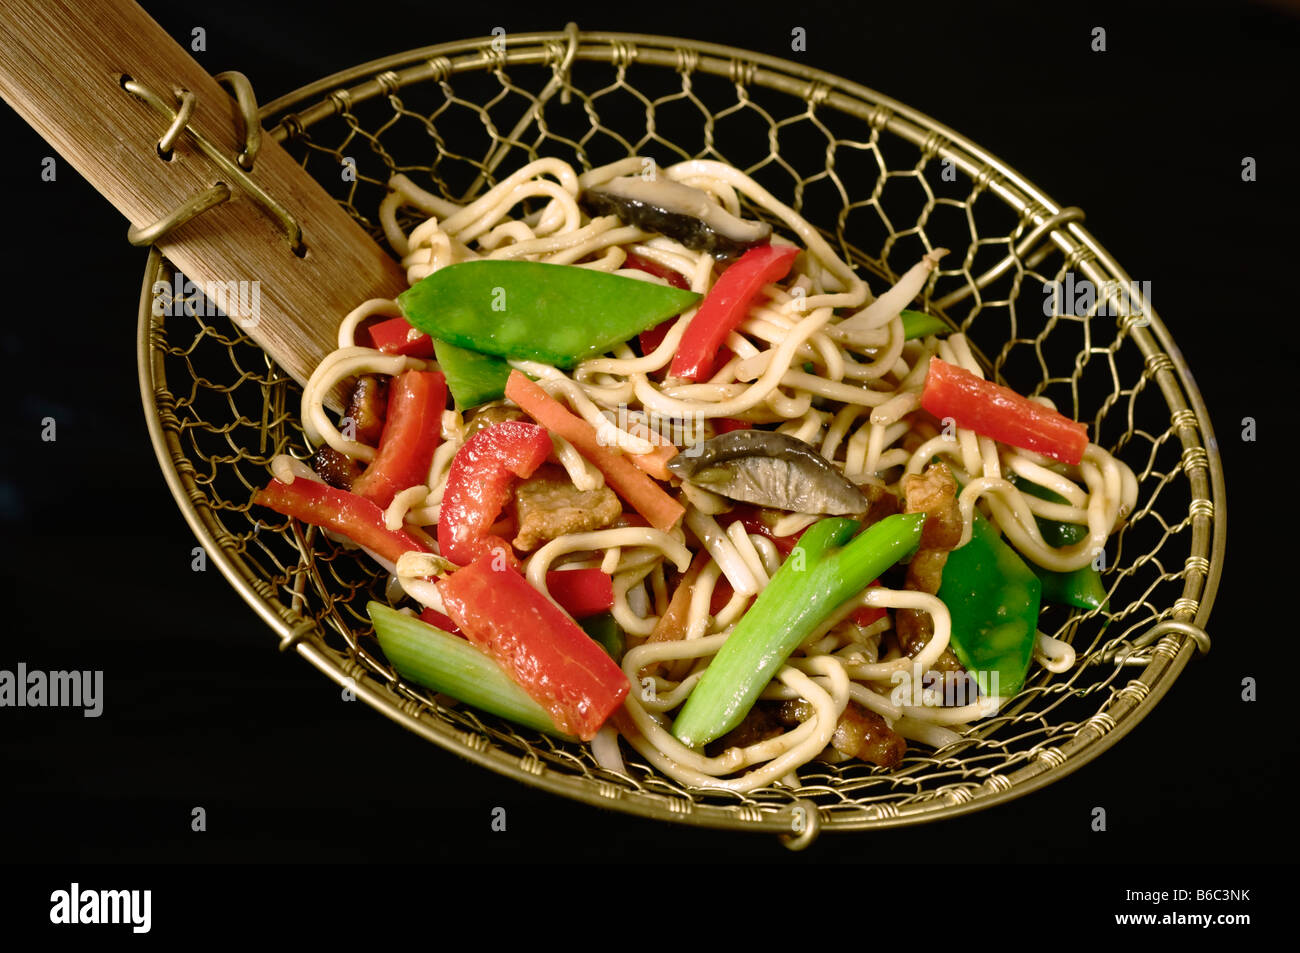 Les aliments chinois chow mein Banque D'Images